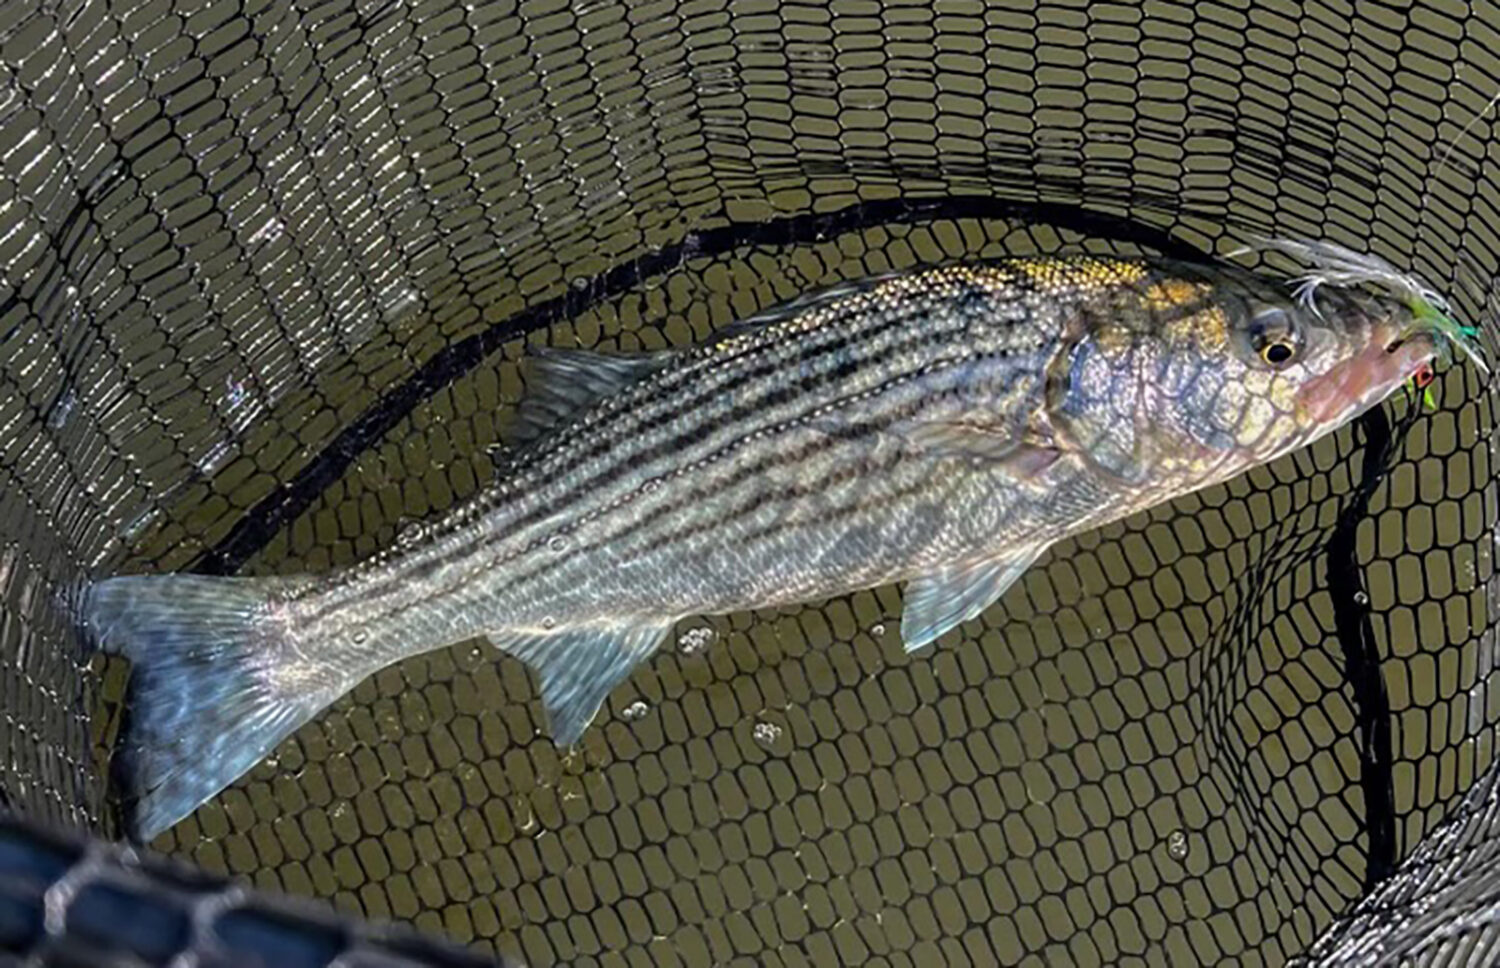 Catch and Release Best Practices to Conserve Striped Bass